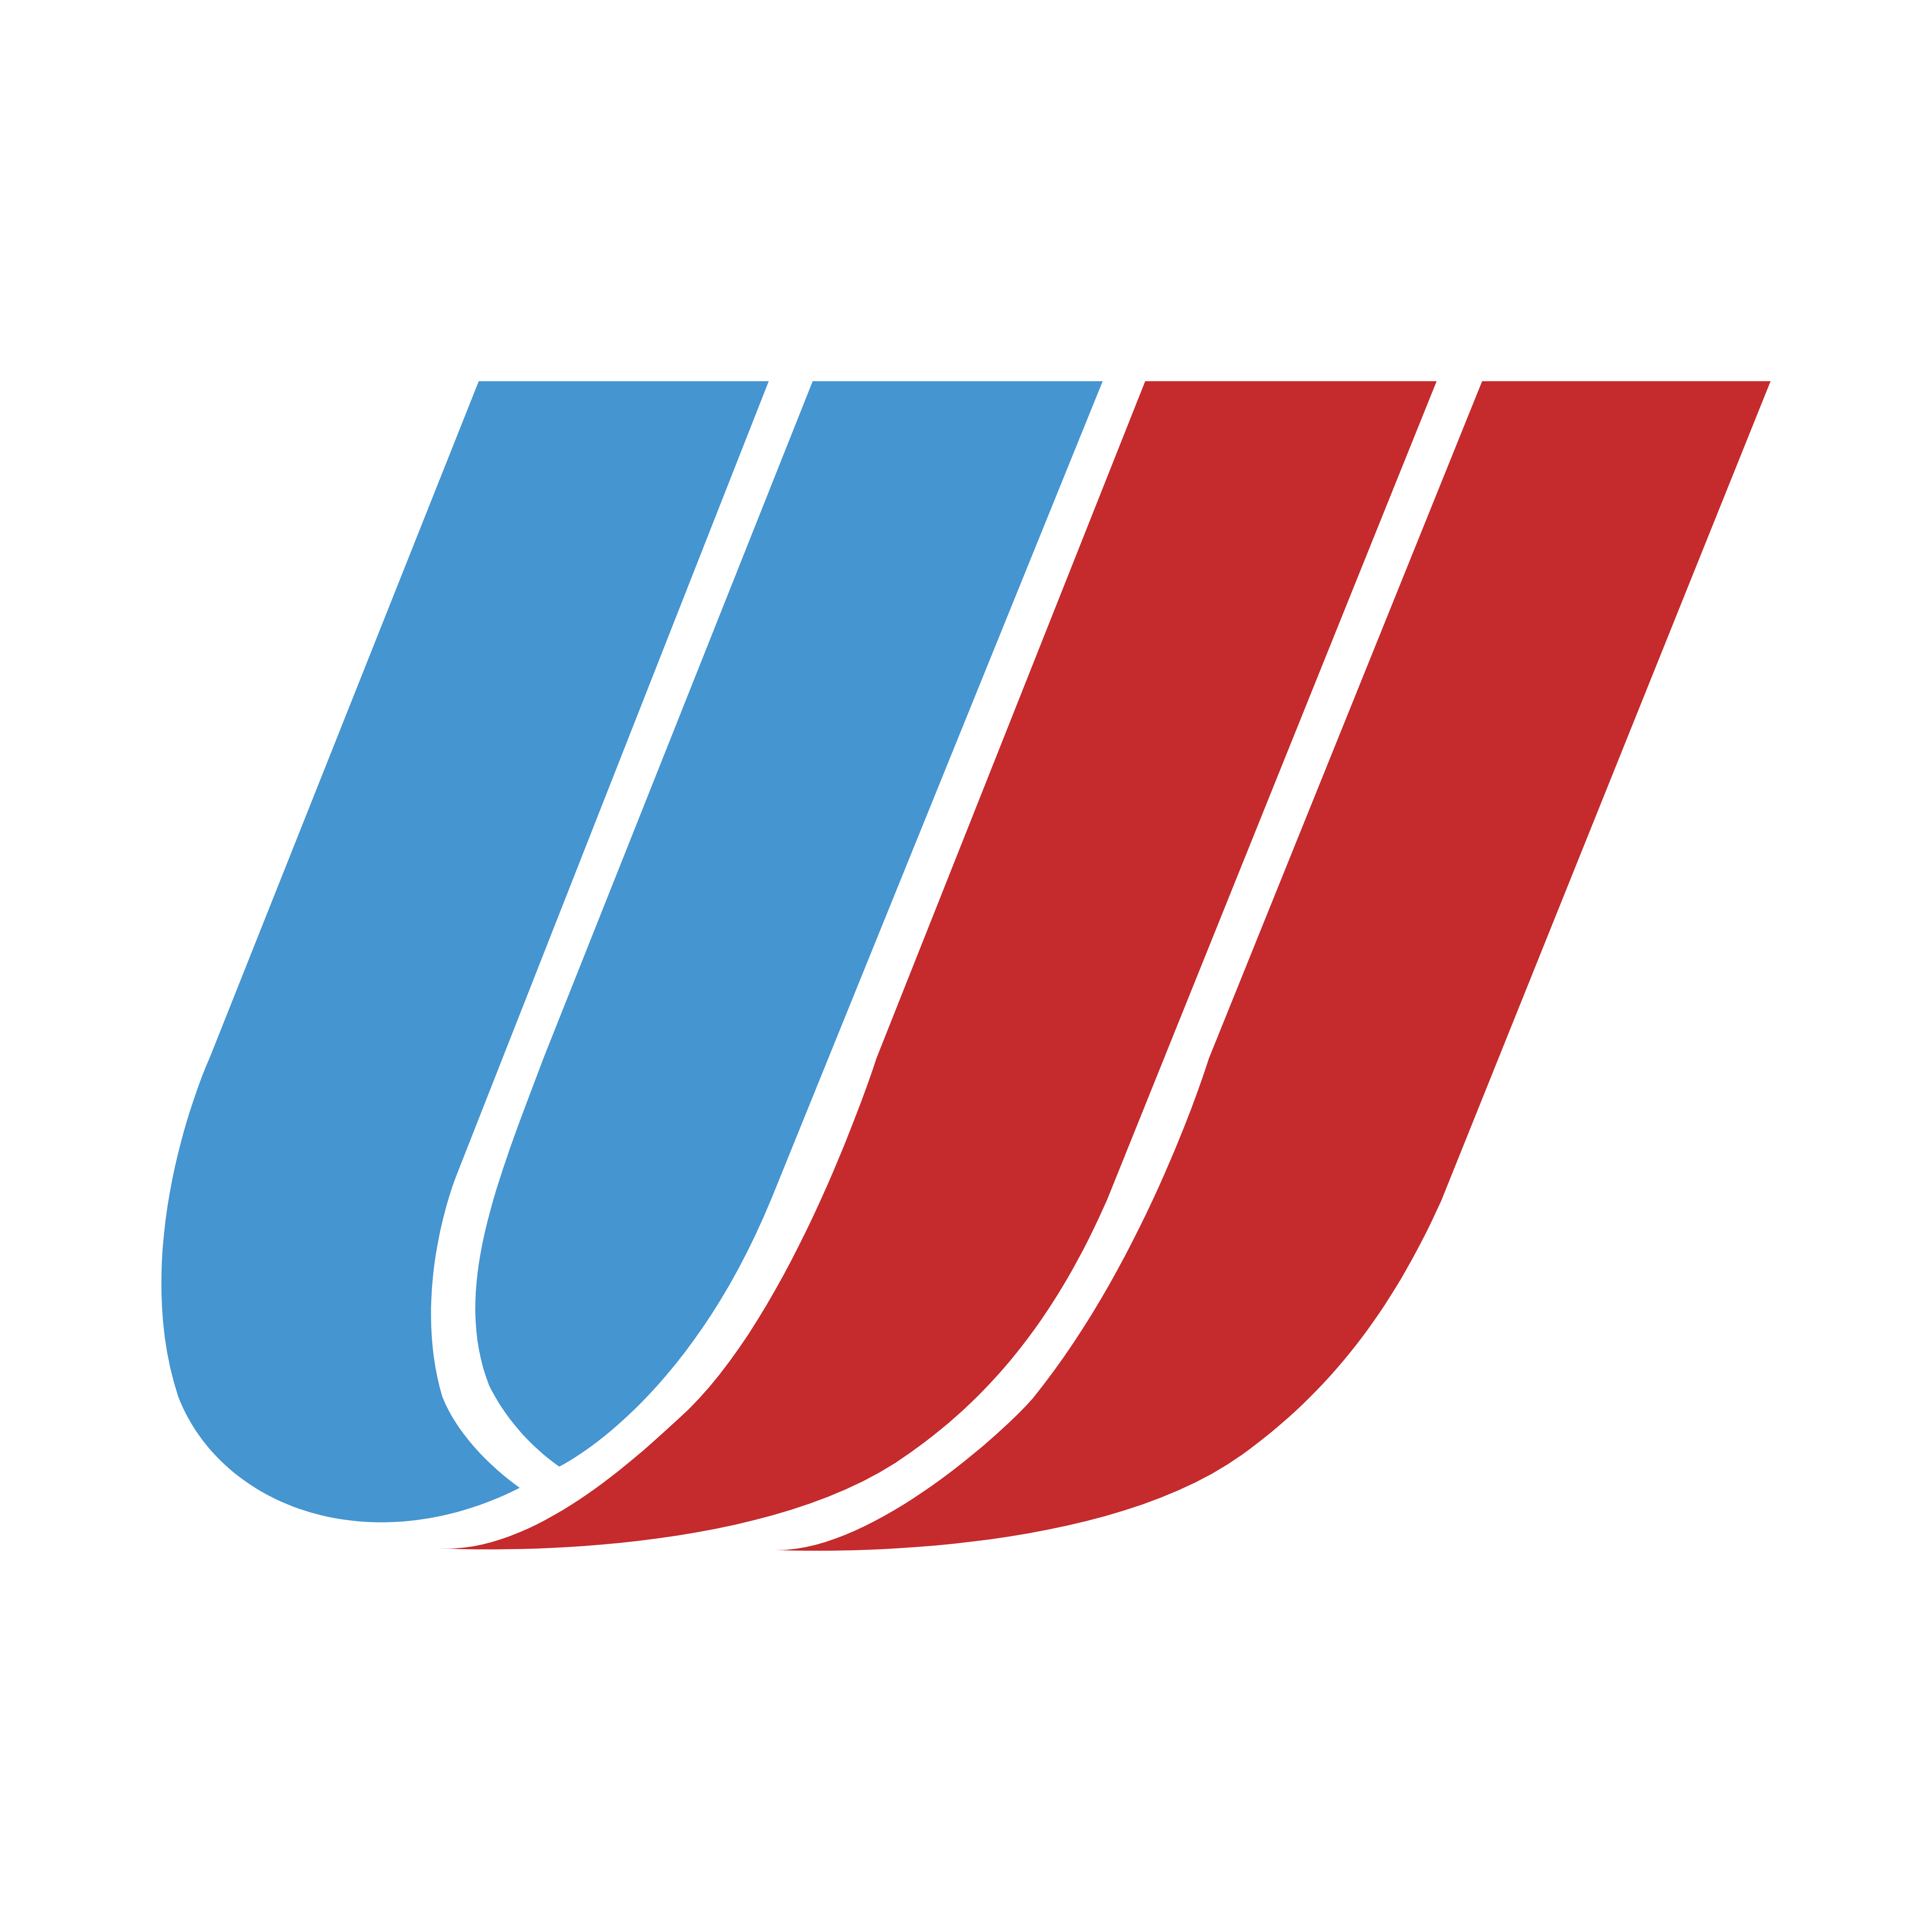 United Airlines Logo Image